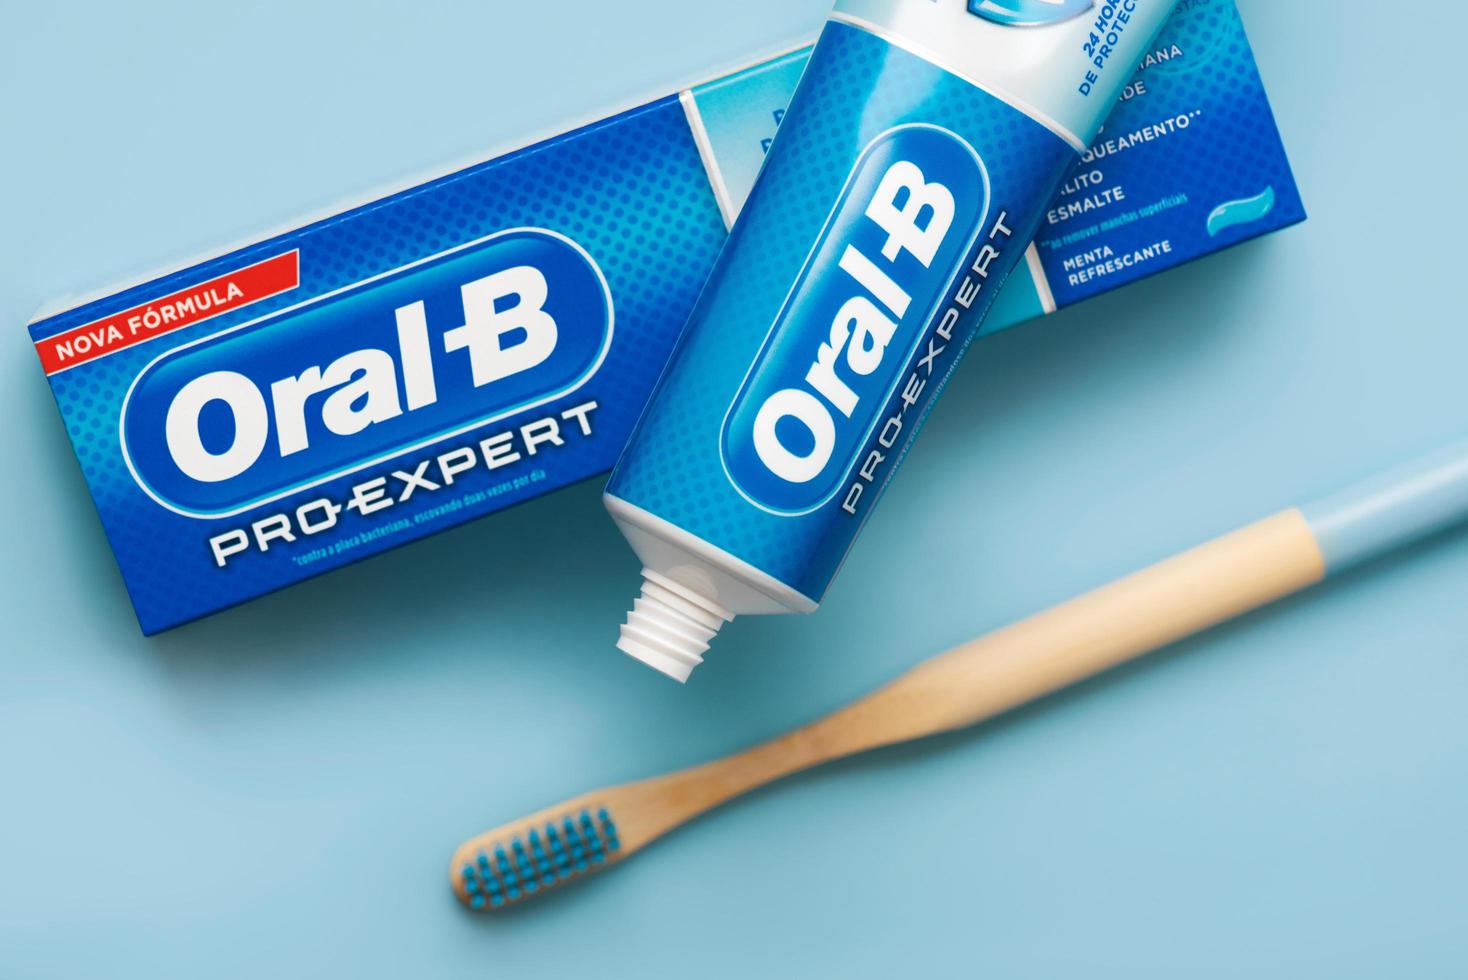 Carton box of Oral-B toothpaste with Oral B toothpaste and bamboo toothbrushe photo